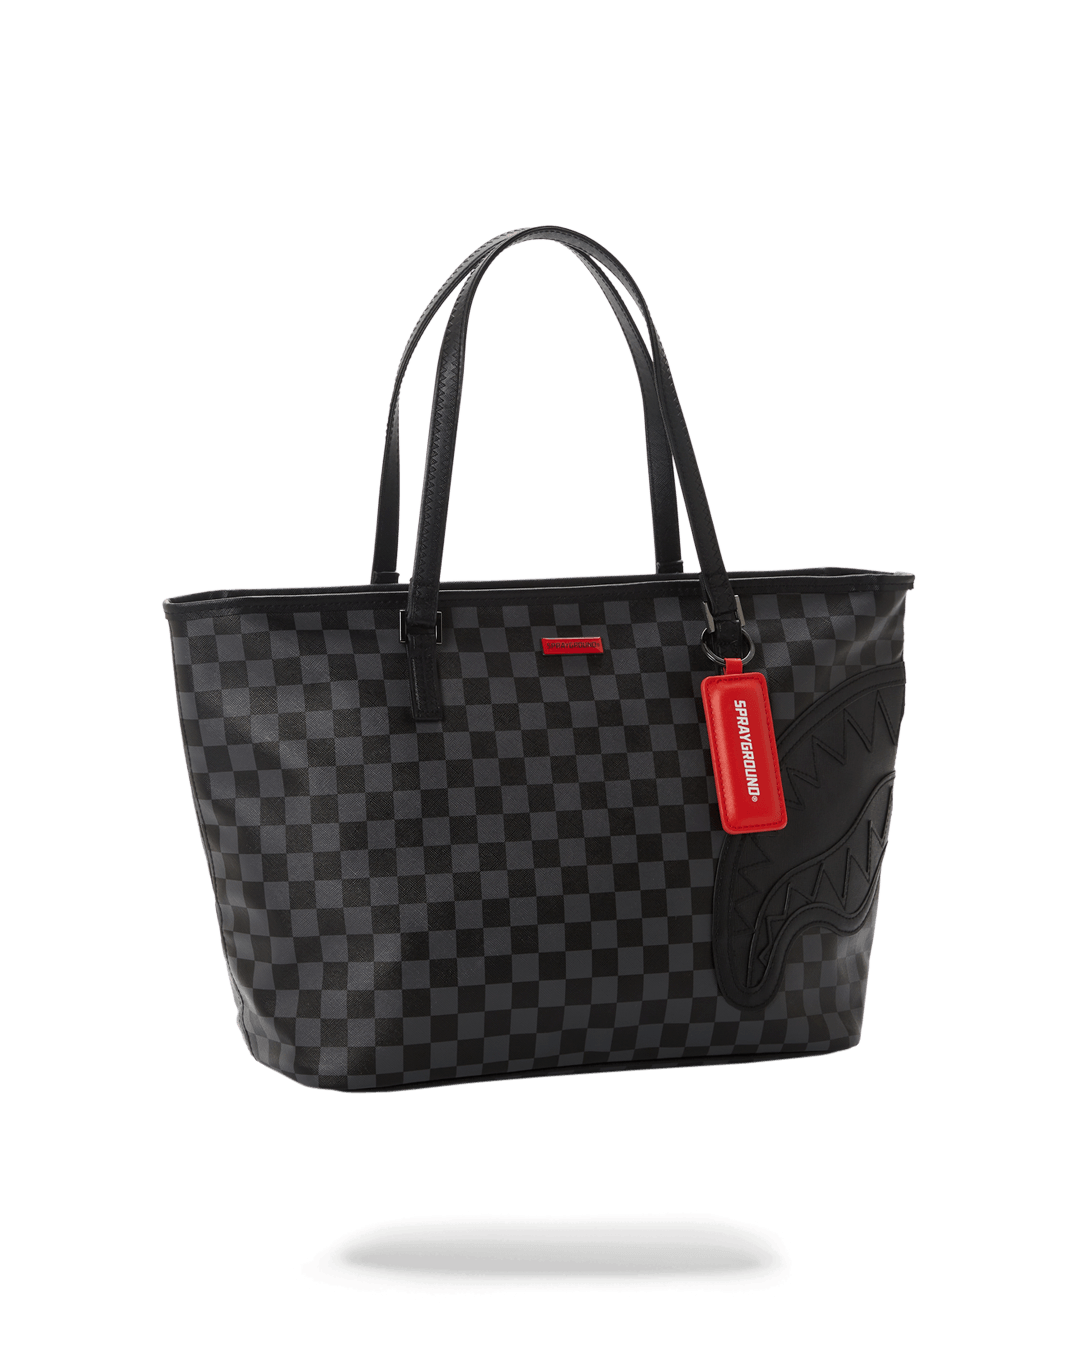 HENNY BLACK TOTE - HIGH QUALITY AND INEXPENSIVE - HENNY BLACK TOTE HIGH QUALITY AND INEXPENSIVE-01-2